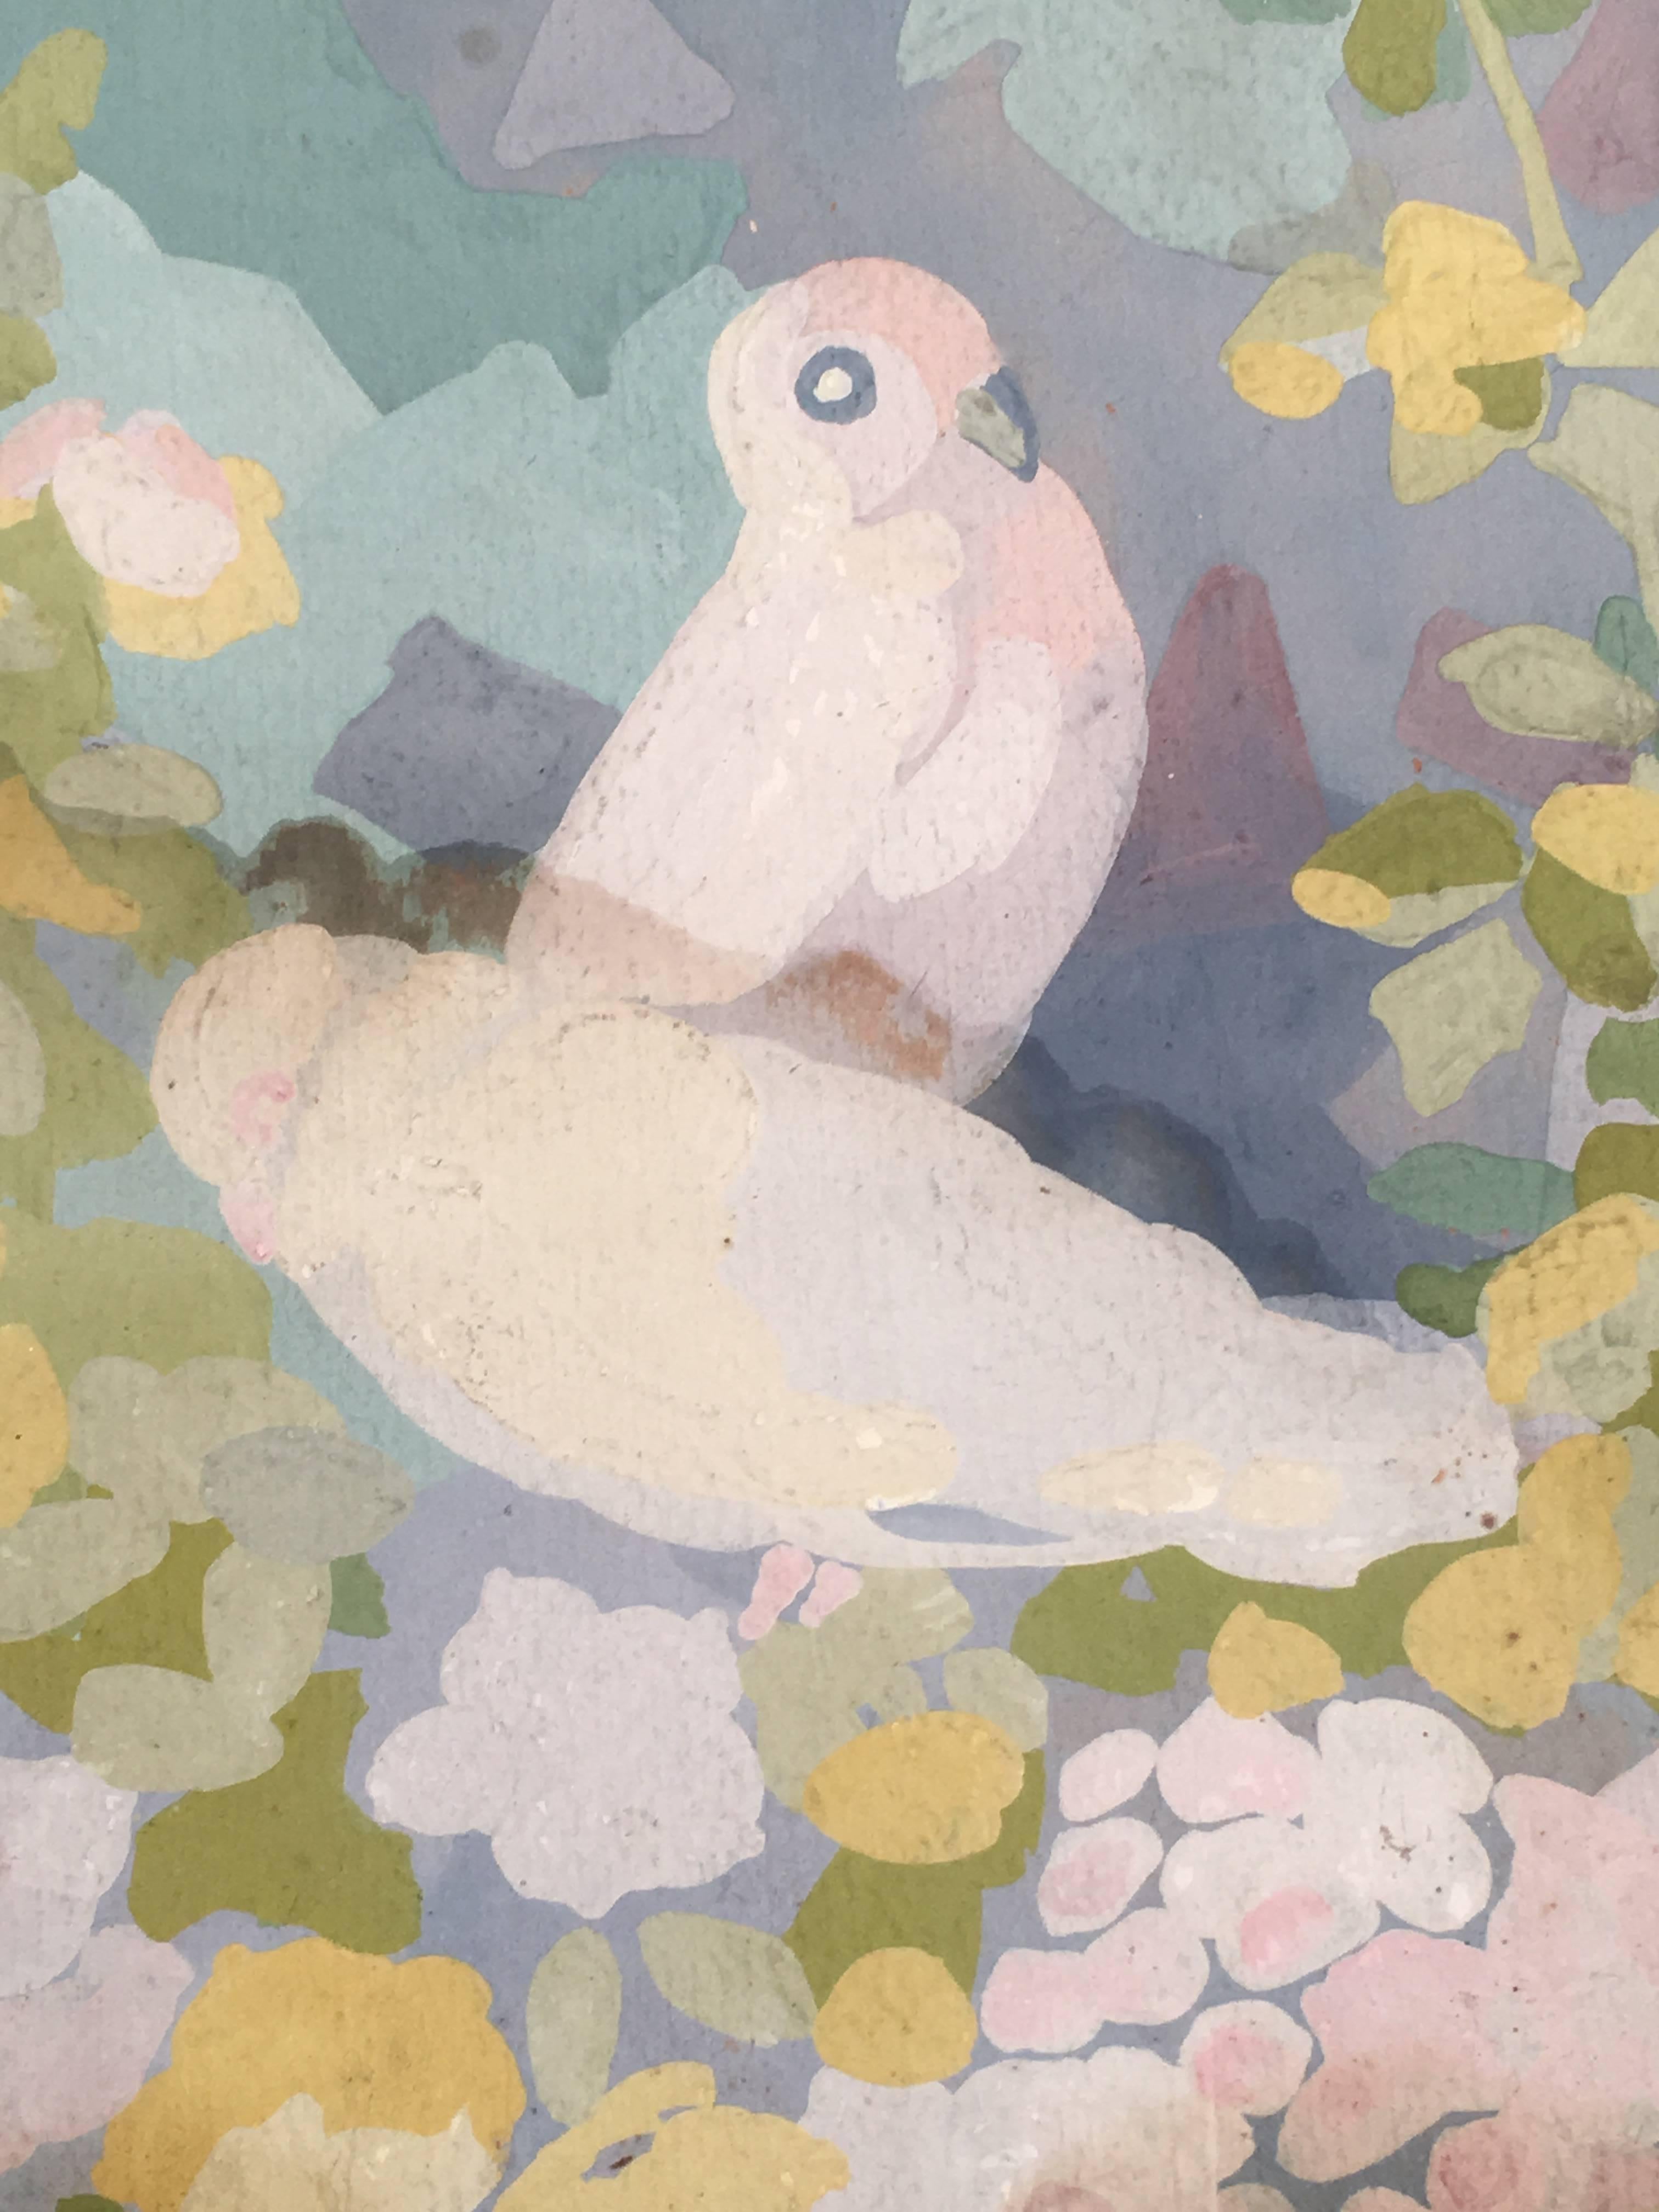 A charming, highly decorative gouache on board painting of two doves in a floral landscape, rendered in beautiful pastel colors of white, pink, yellow and various shades of blue, signed P. Fine lower right, framed with a red linen fillet within its